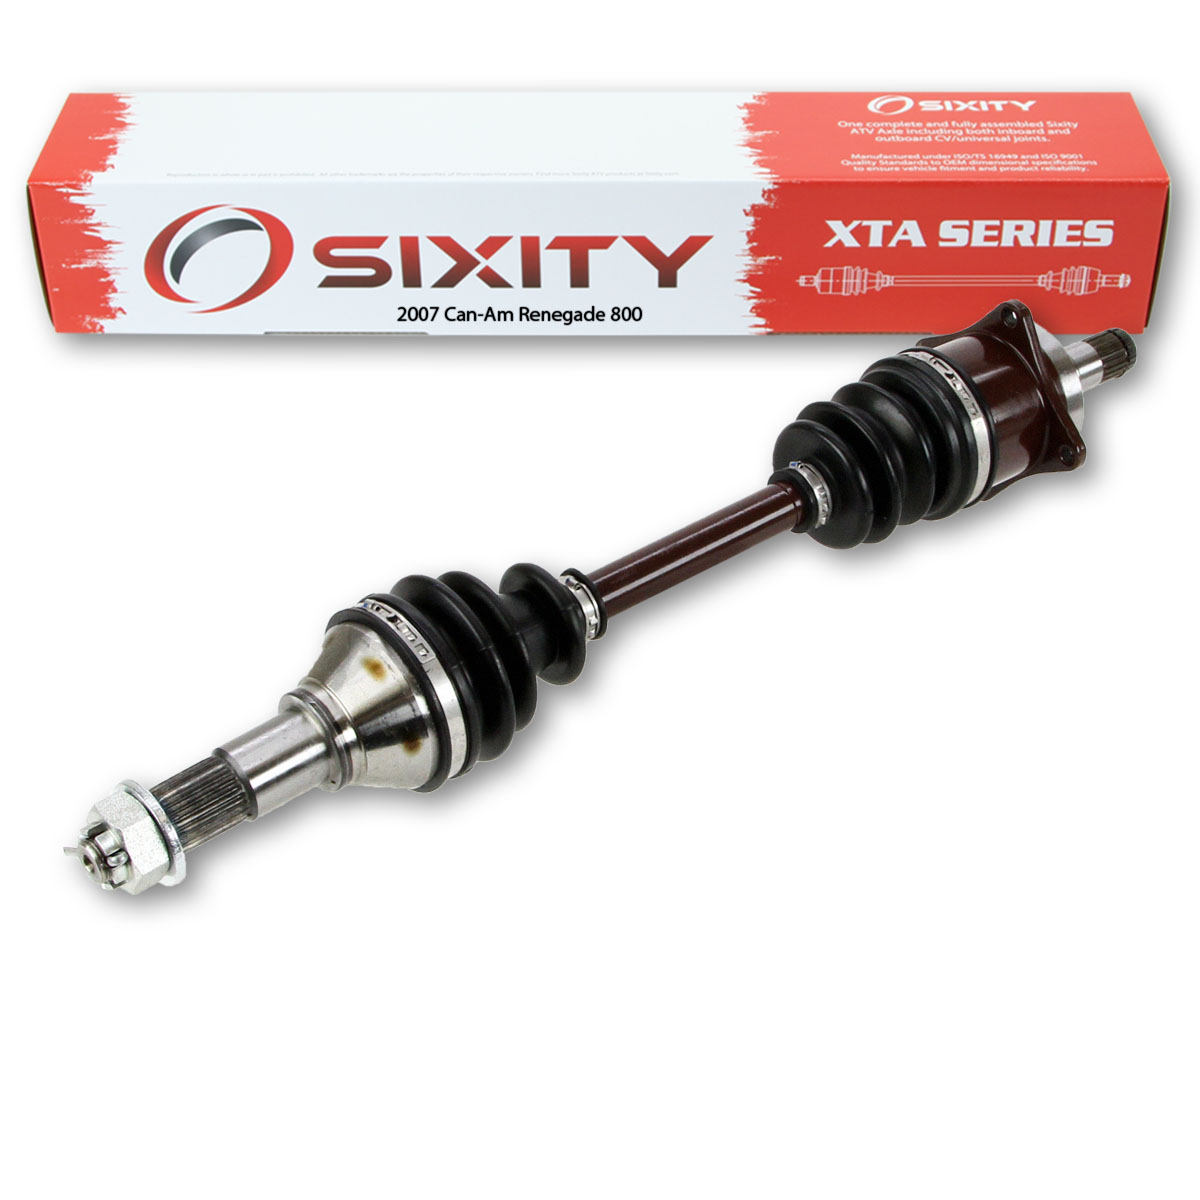 Sixity 2007 Can-Am Renegade 800 4X4 Front Left XTA ATV Axle